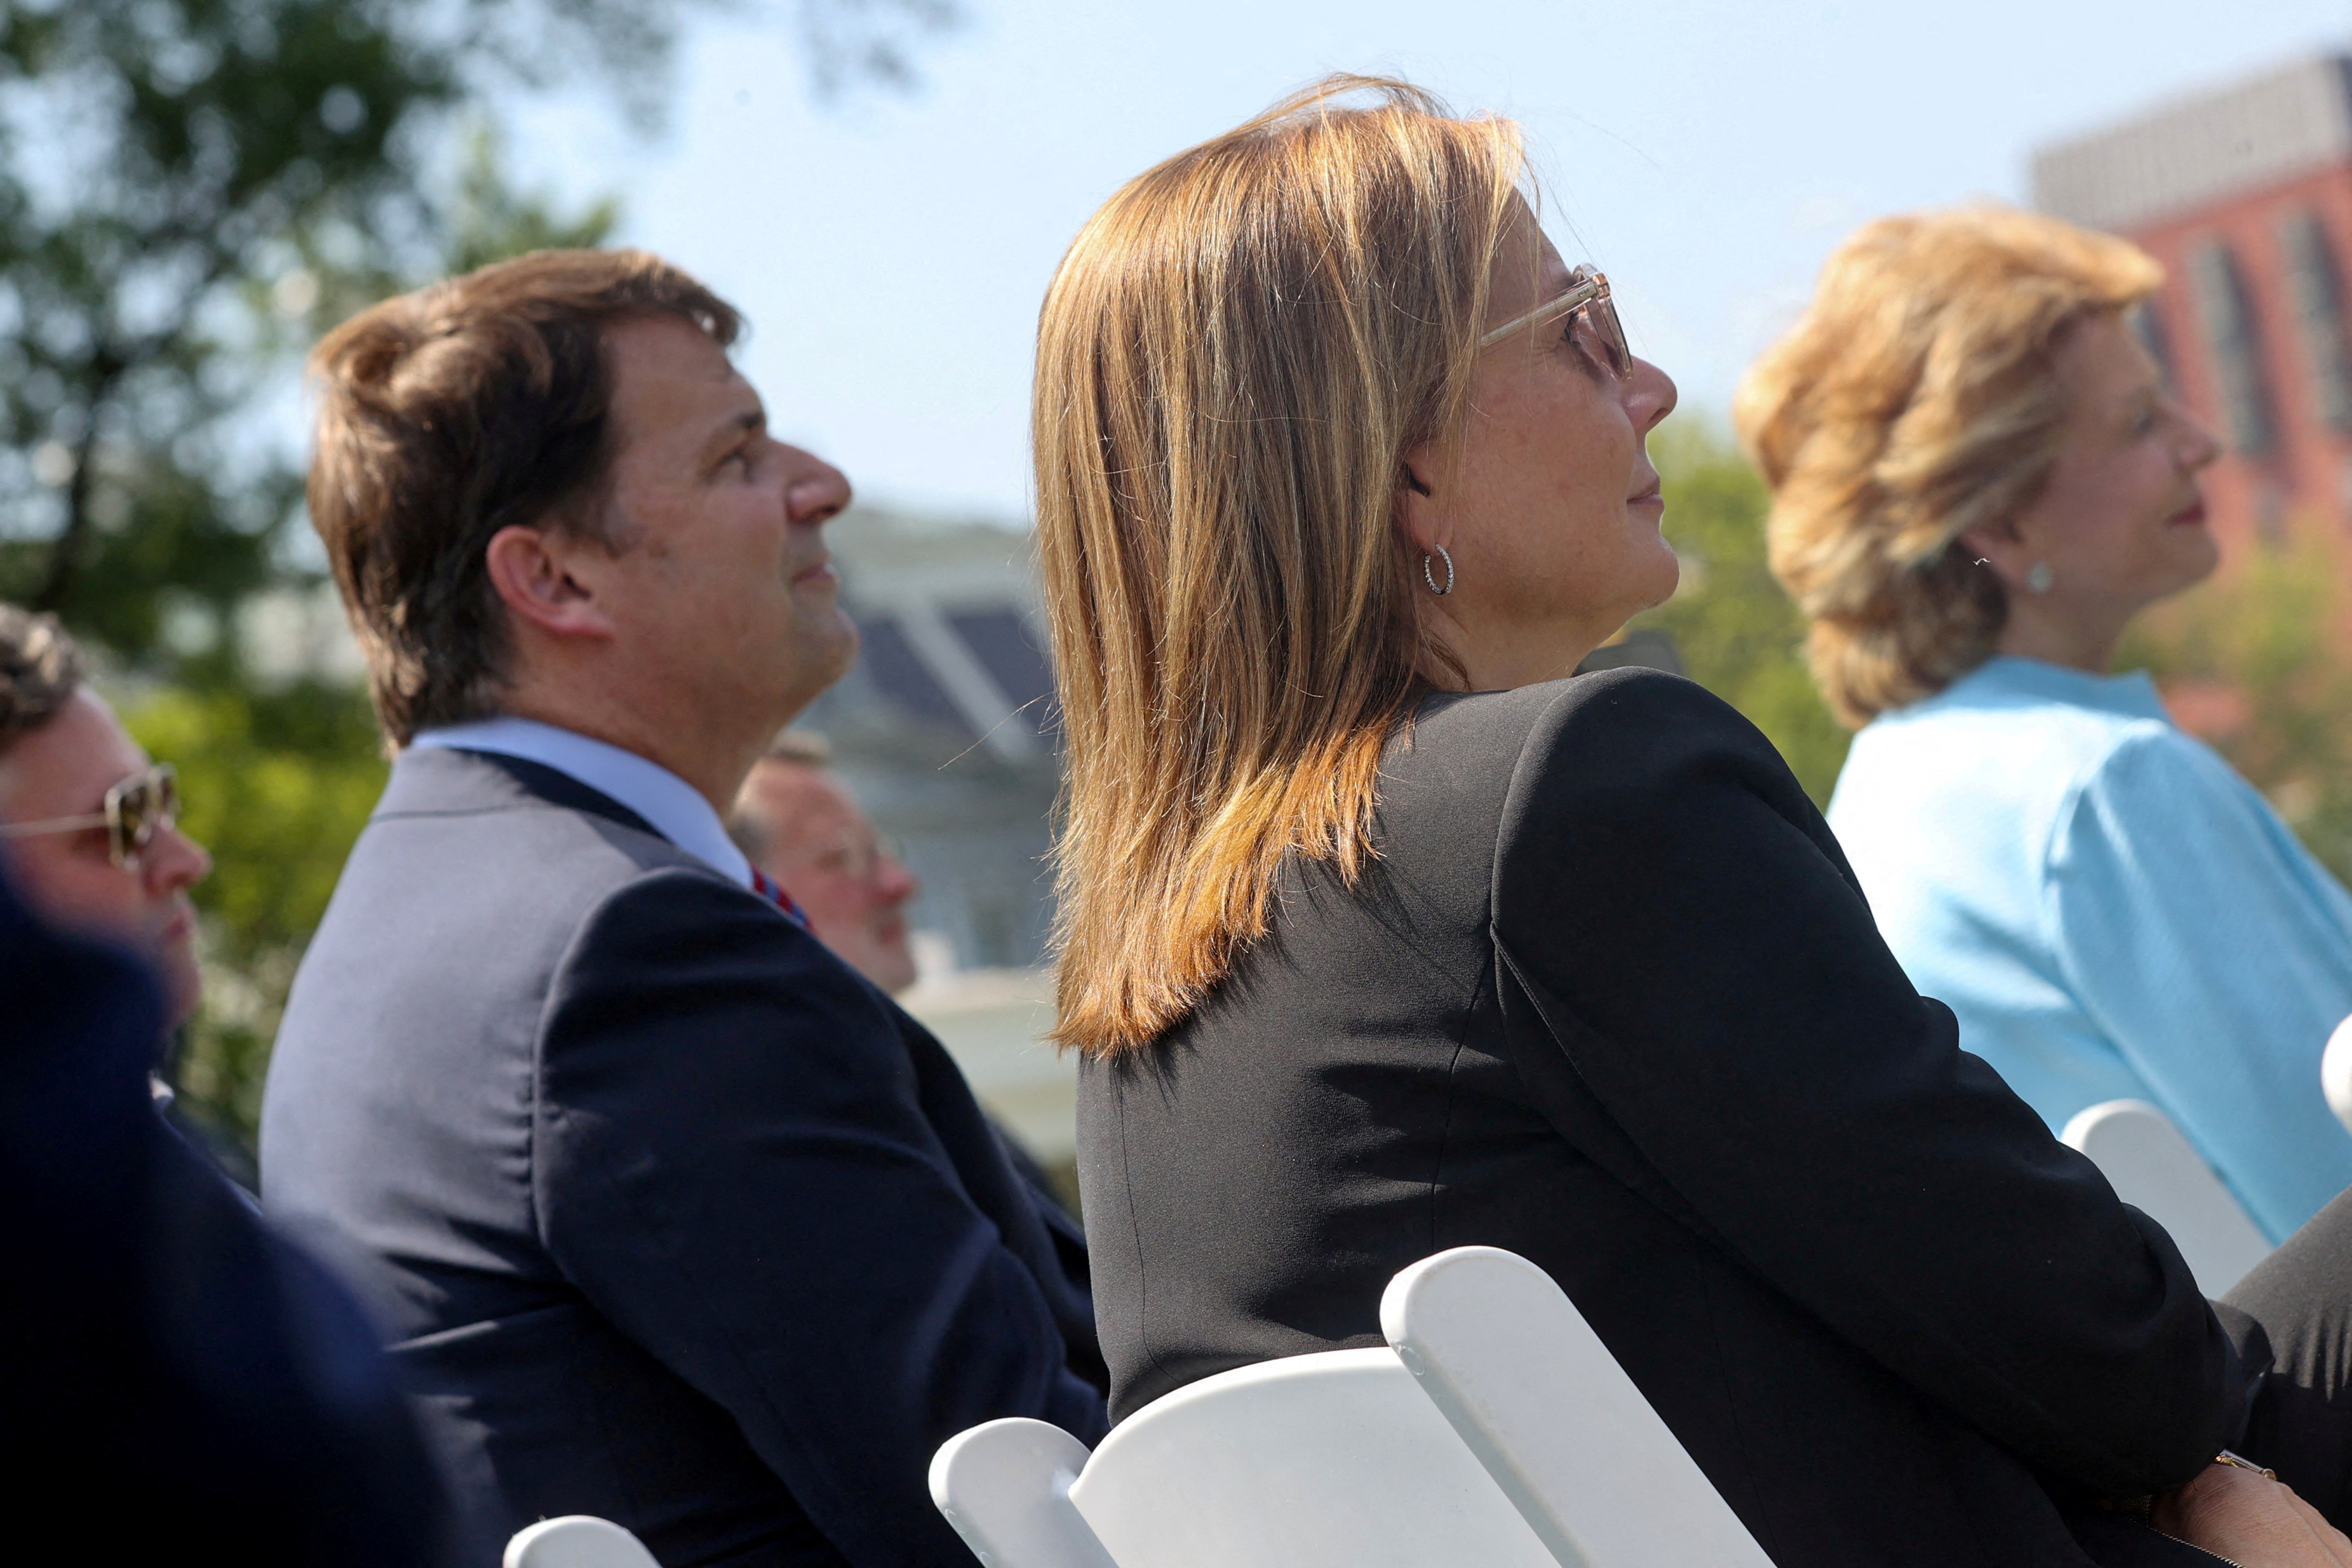 The CEOs of Ford and GM, Farley and Barra, are pictured at an event in Washington